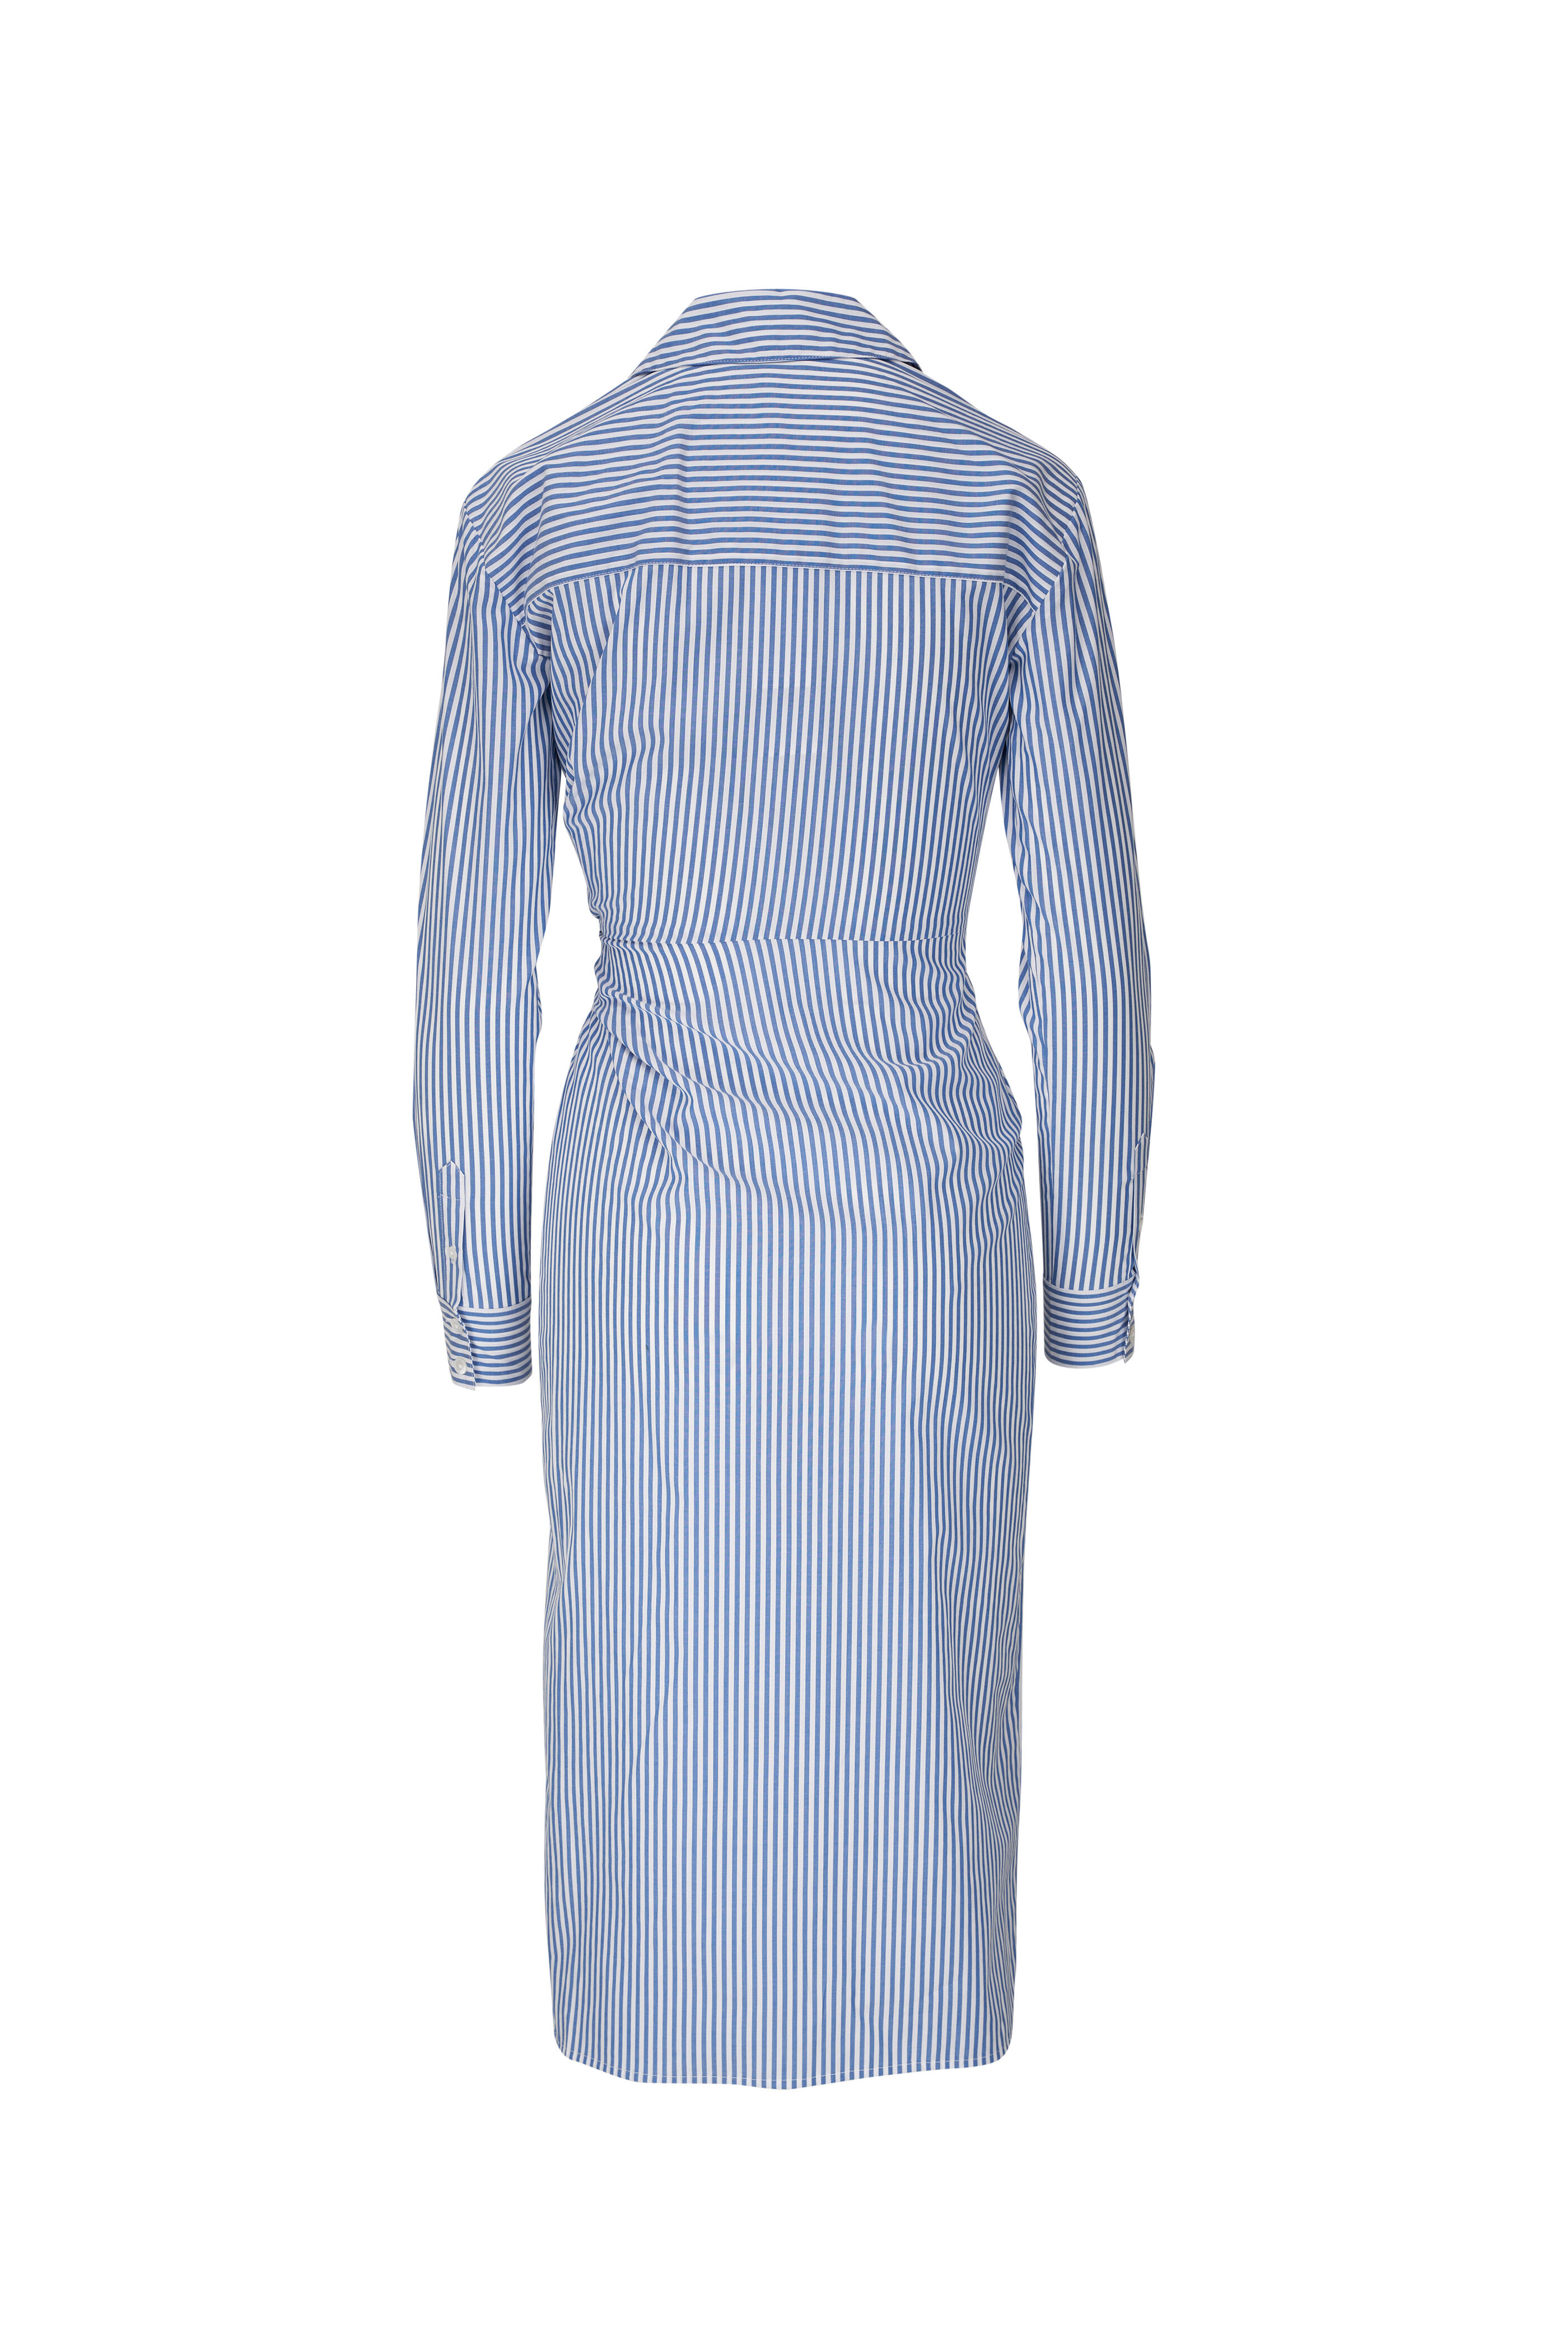 M Made in Italy Women's Striped Linen midi Dress, White Combo, Small at   Women's Clothing store